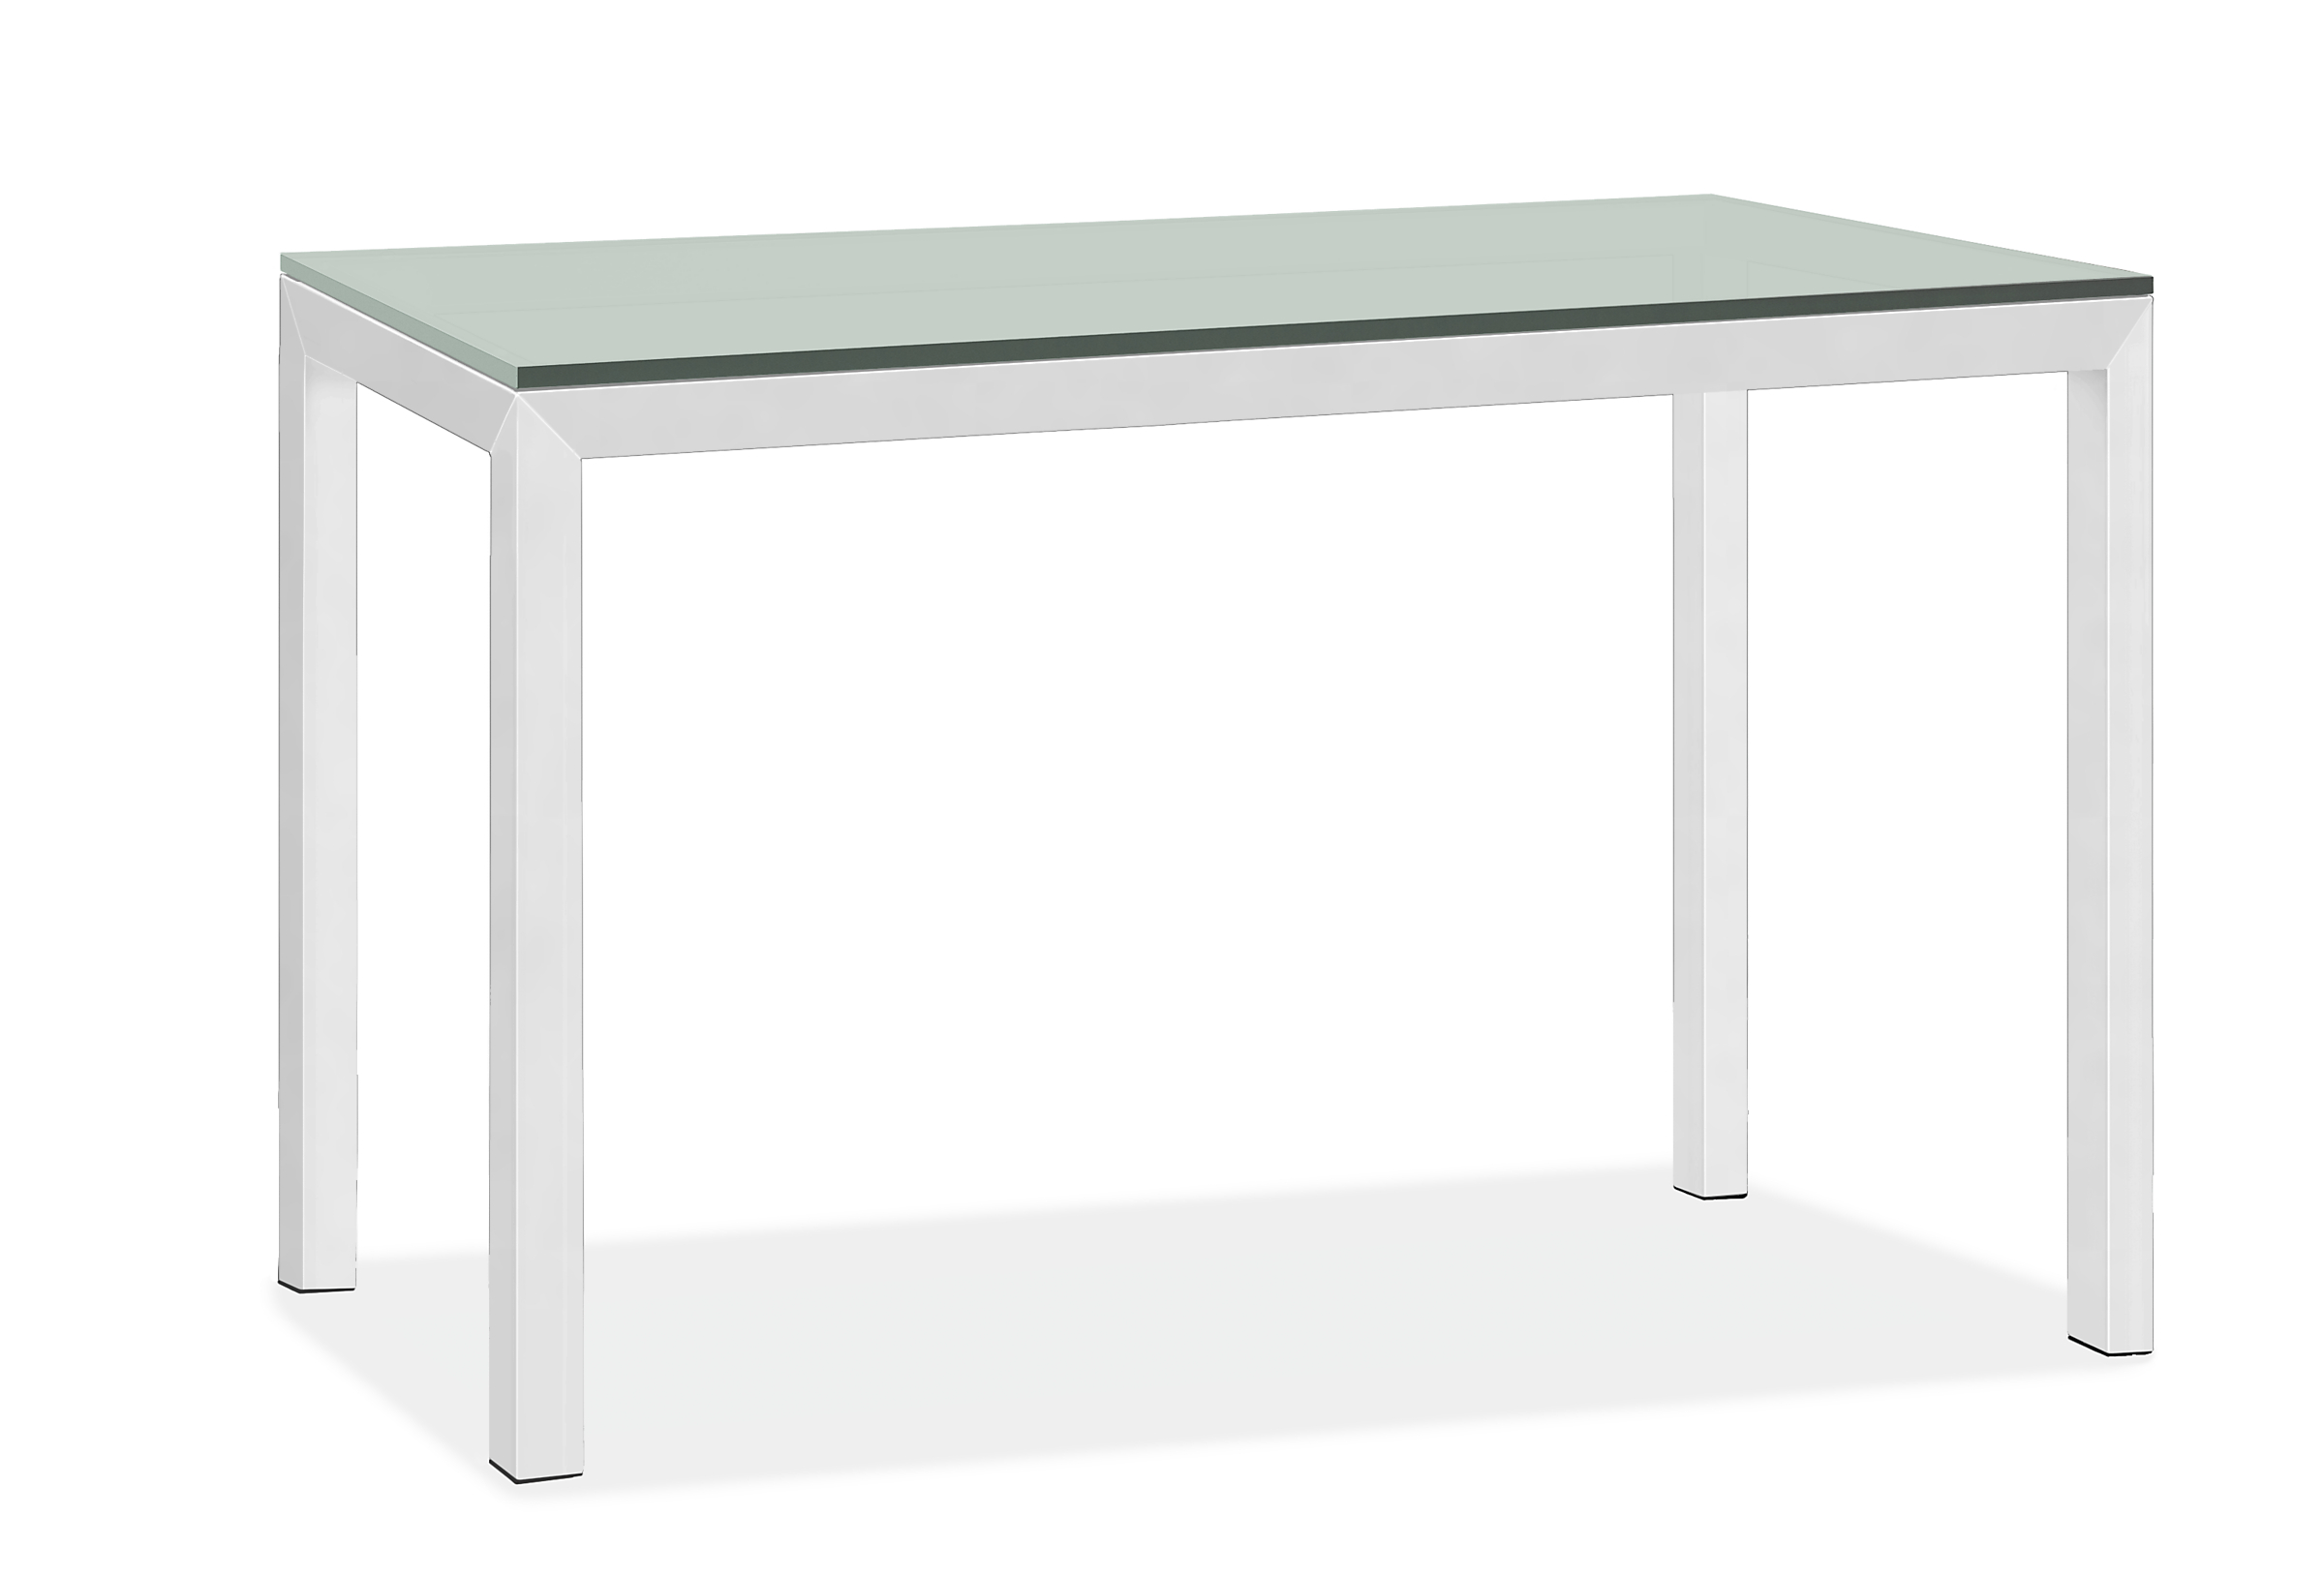 Parsons 48w 24d 35h Outdoor Counter Table with 2" Leg